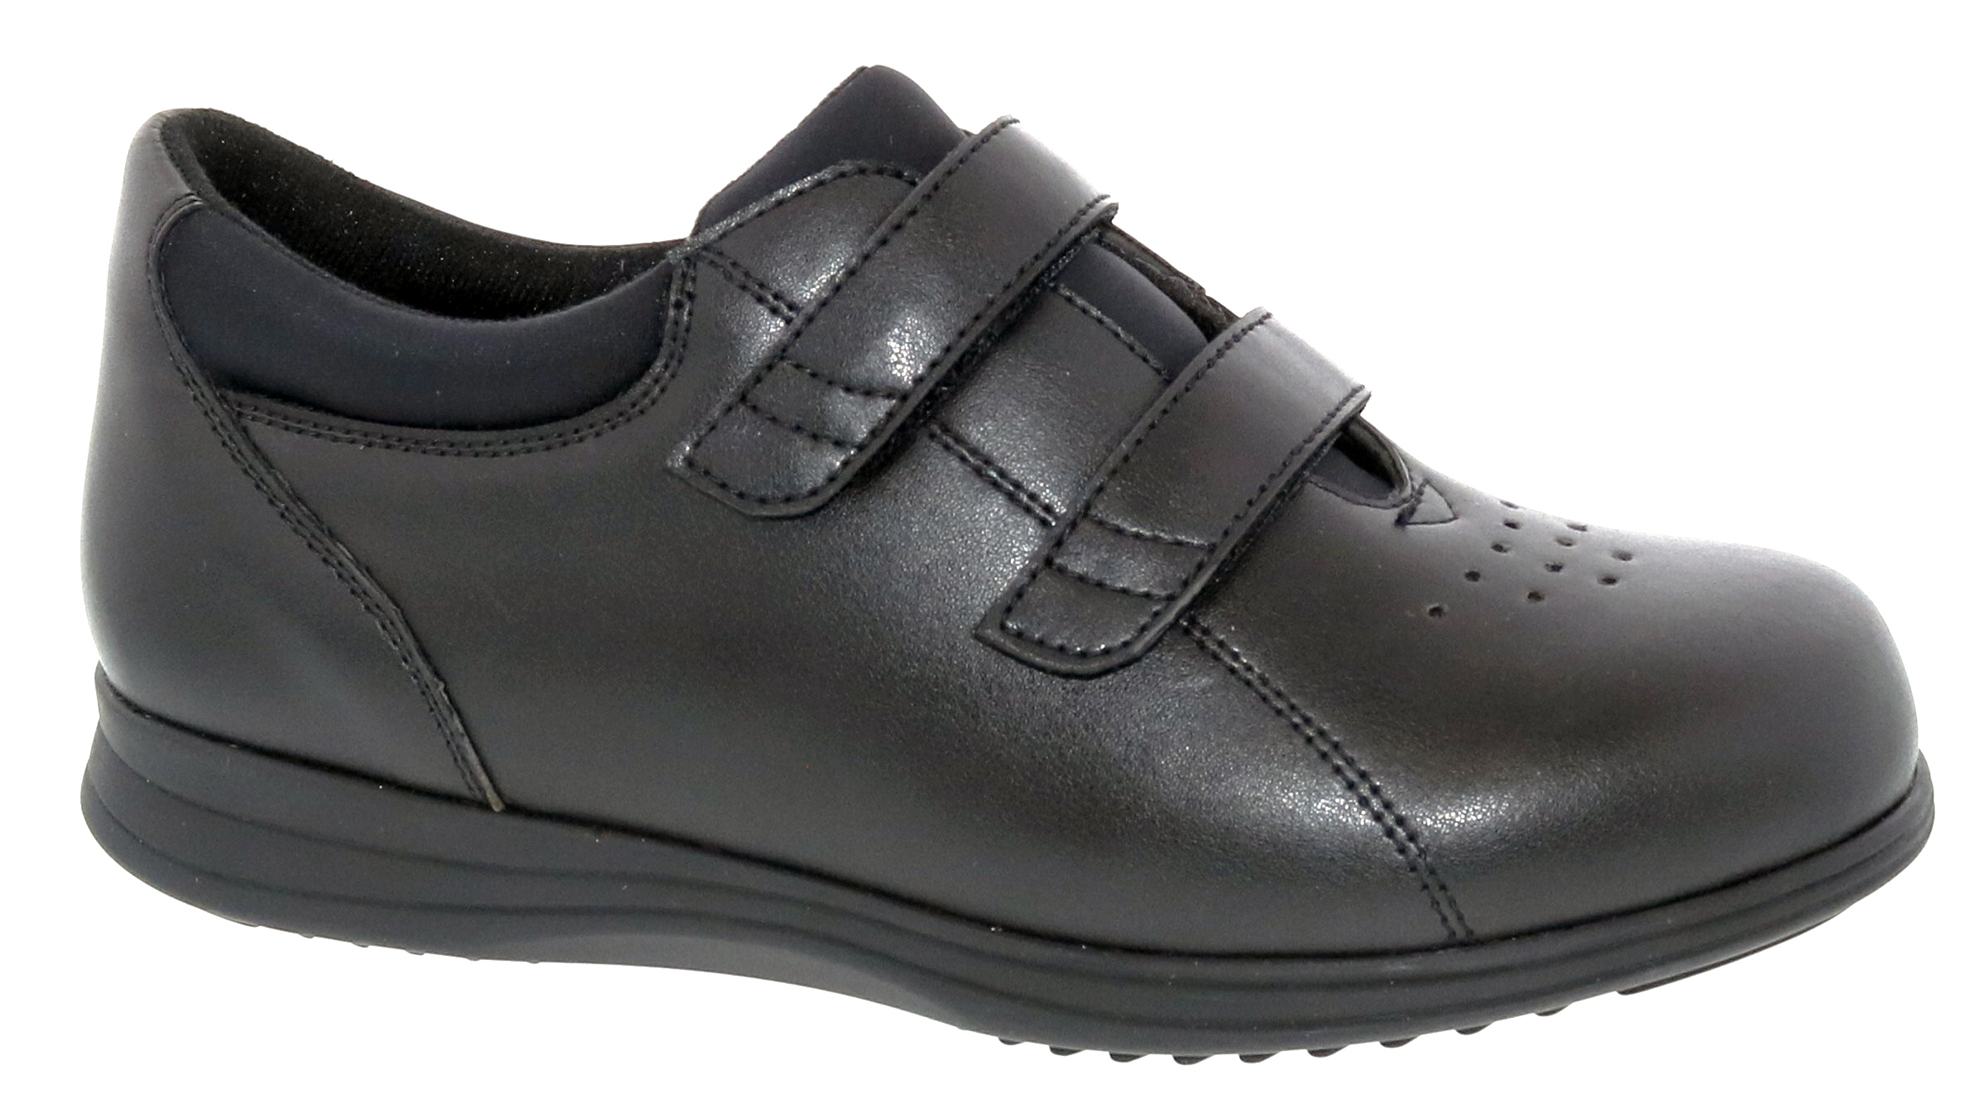 Footsaver Shoes Dabber 84521 - Women's Casual Comfort Therapeutic Diabetic Shoe - Extra Depth For Orthotics